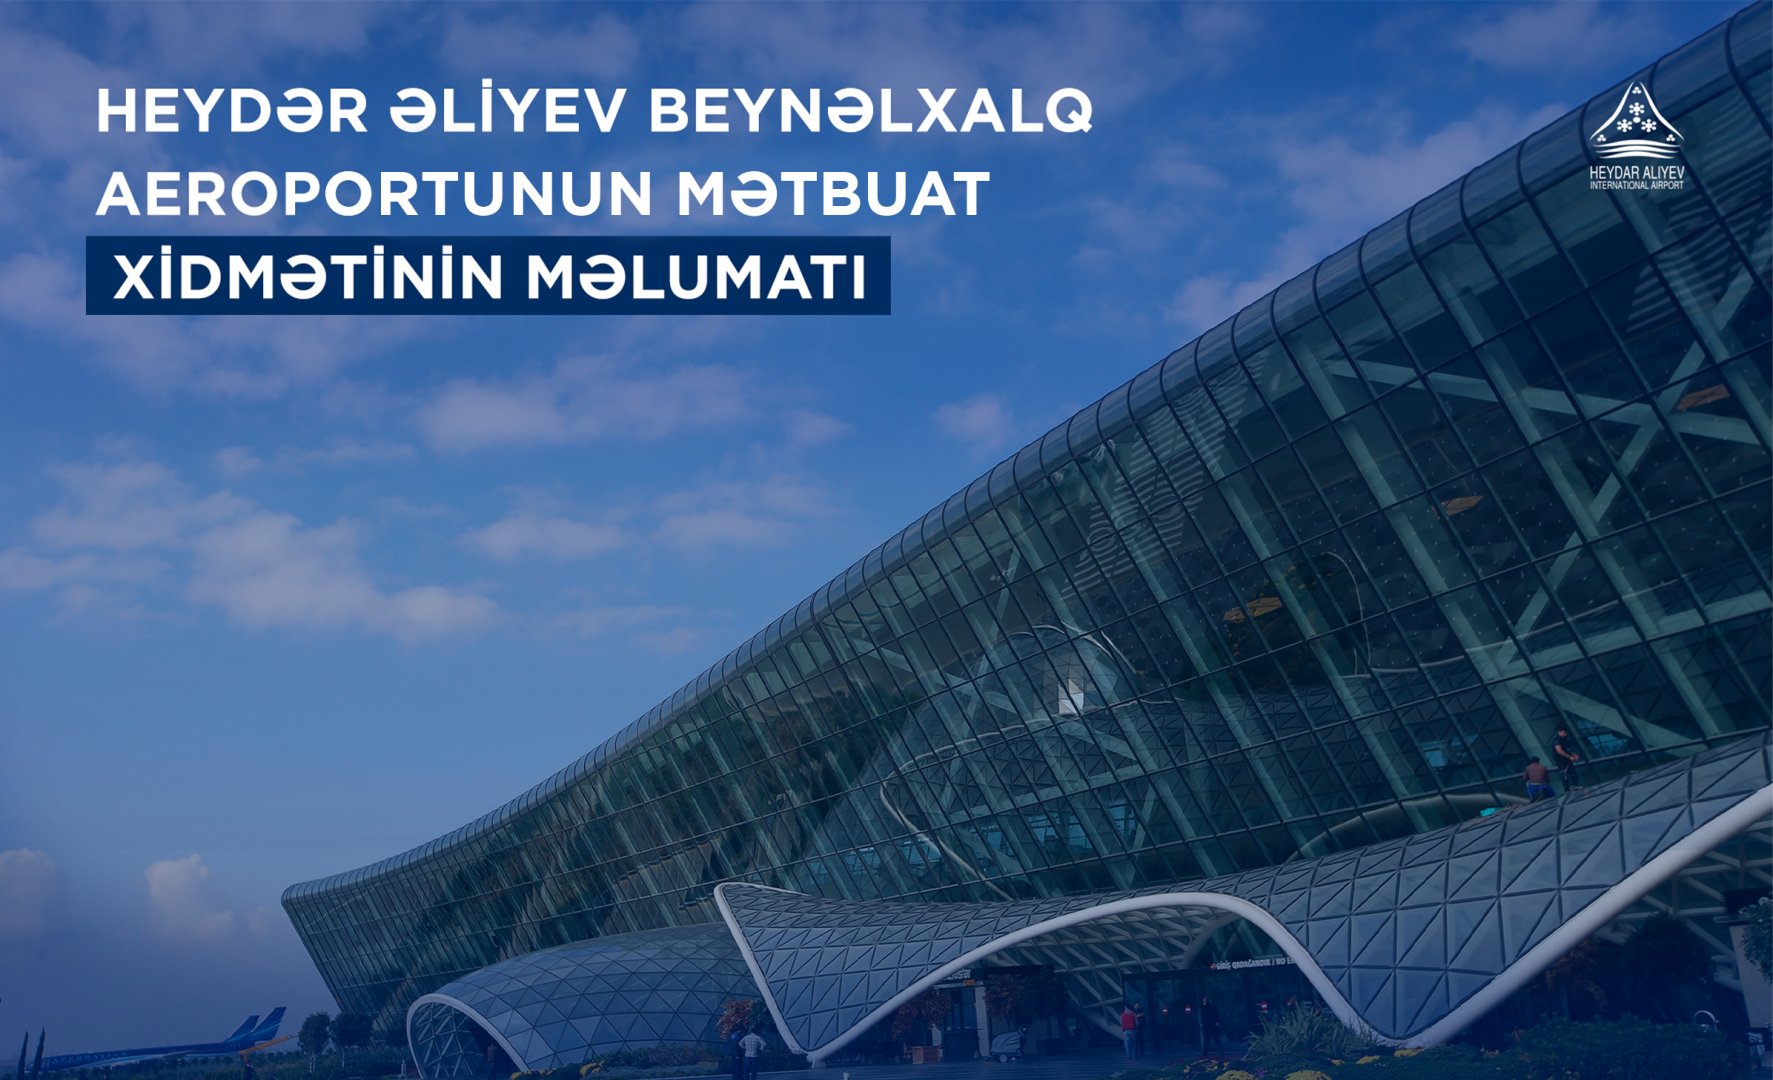 Passenger traffic at Baku Airport increased by more than 30% during the holidays